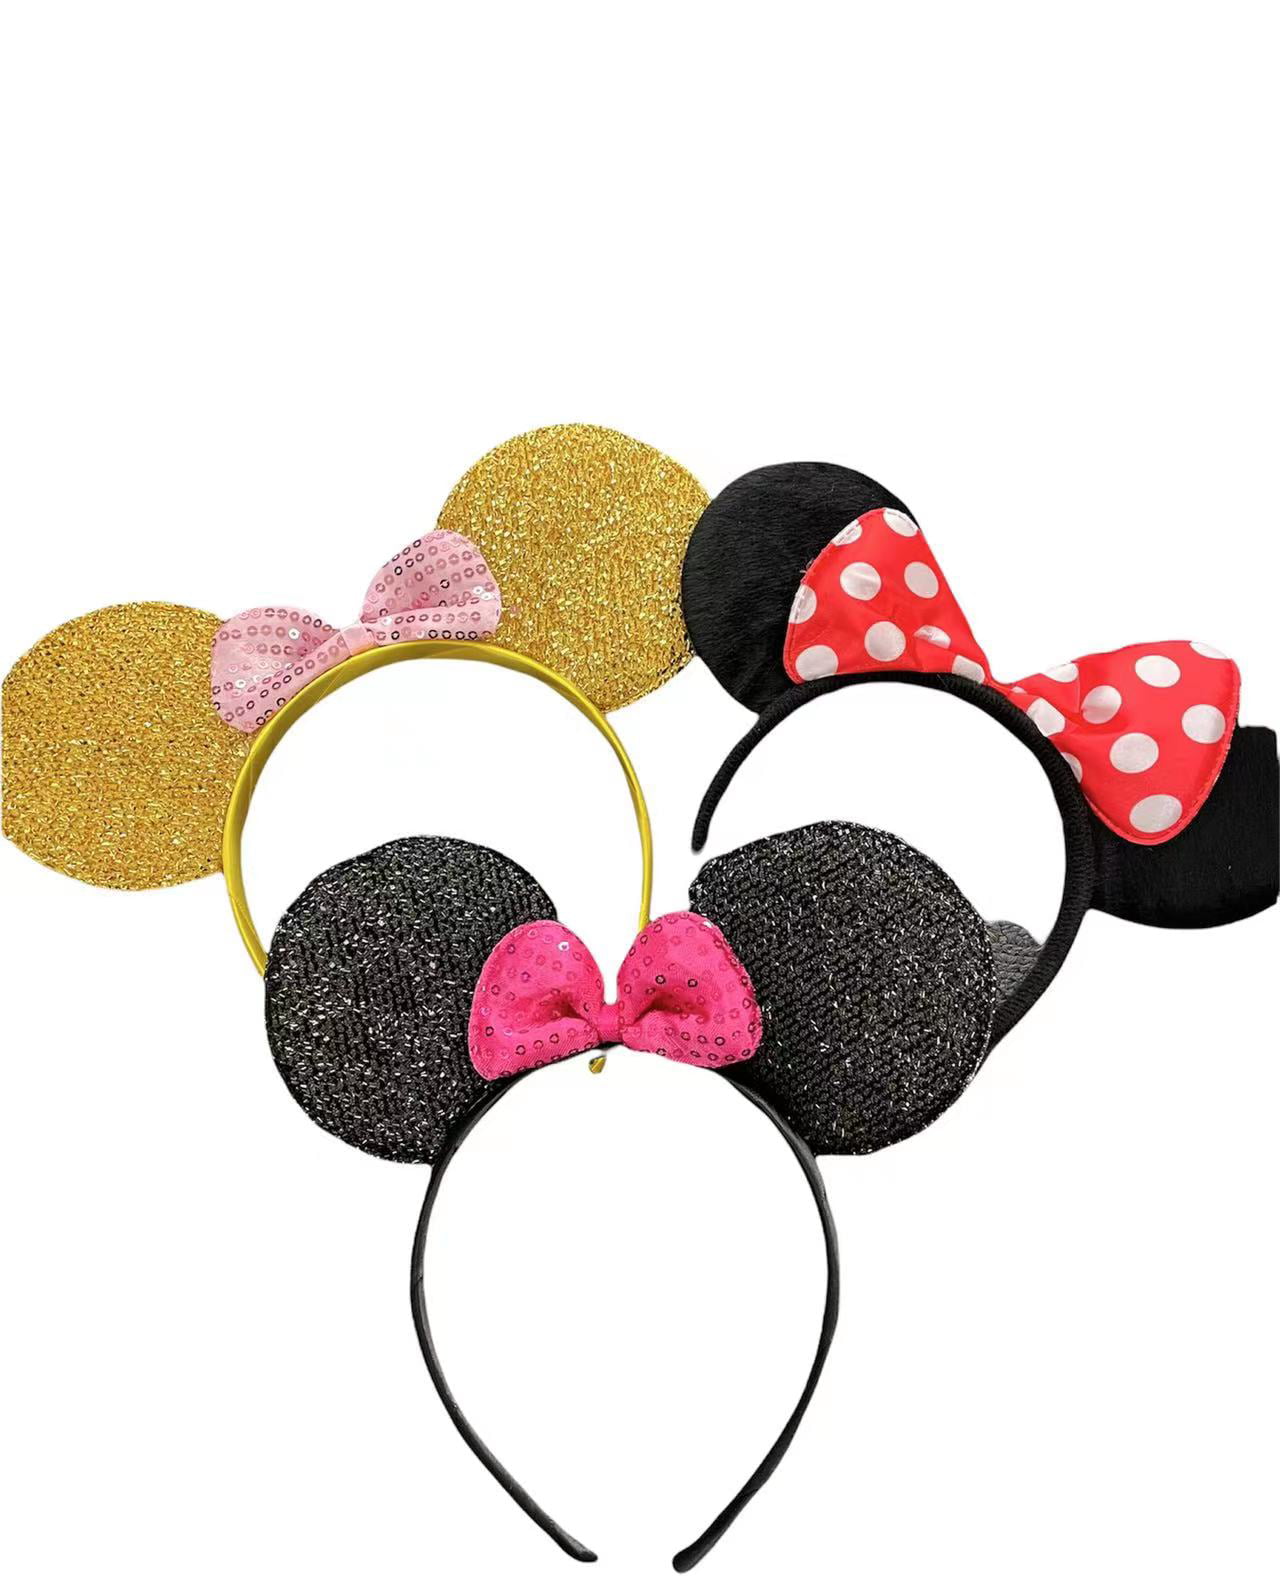 NEW Sequin & Glitter Minnie Mouse Ears with Bow Fancy Dress Party World Book Day 